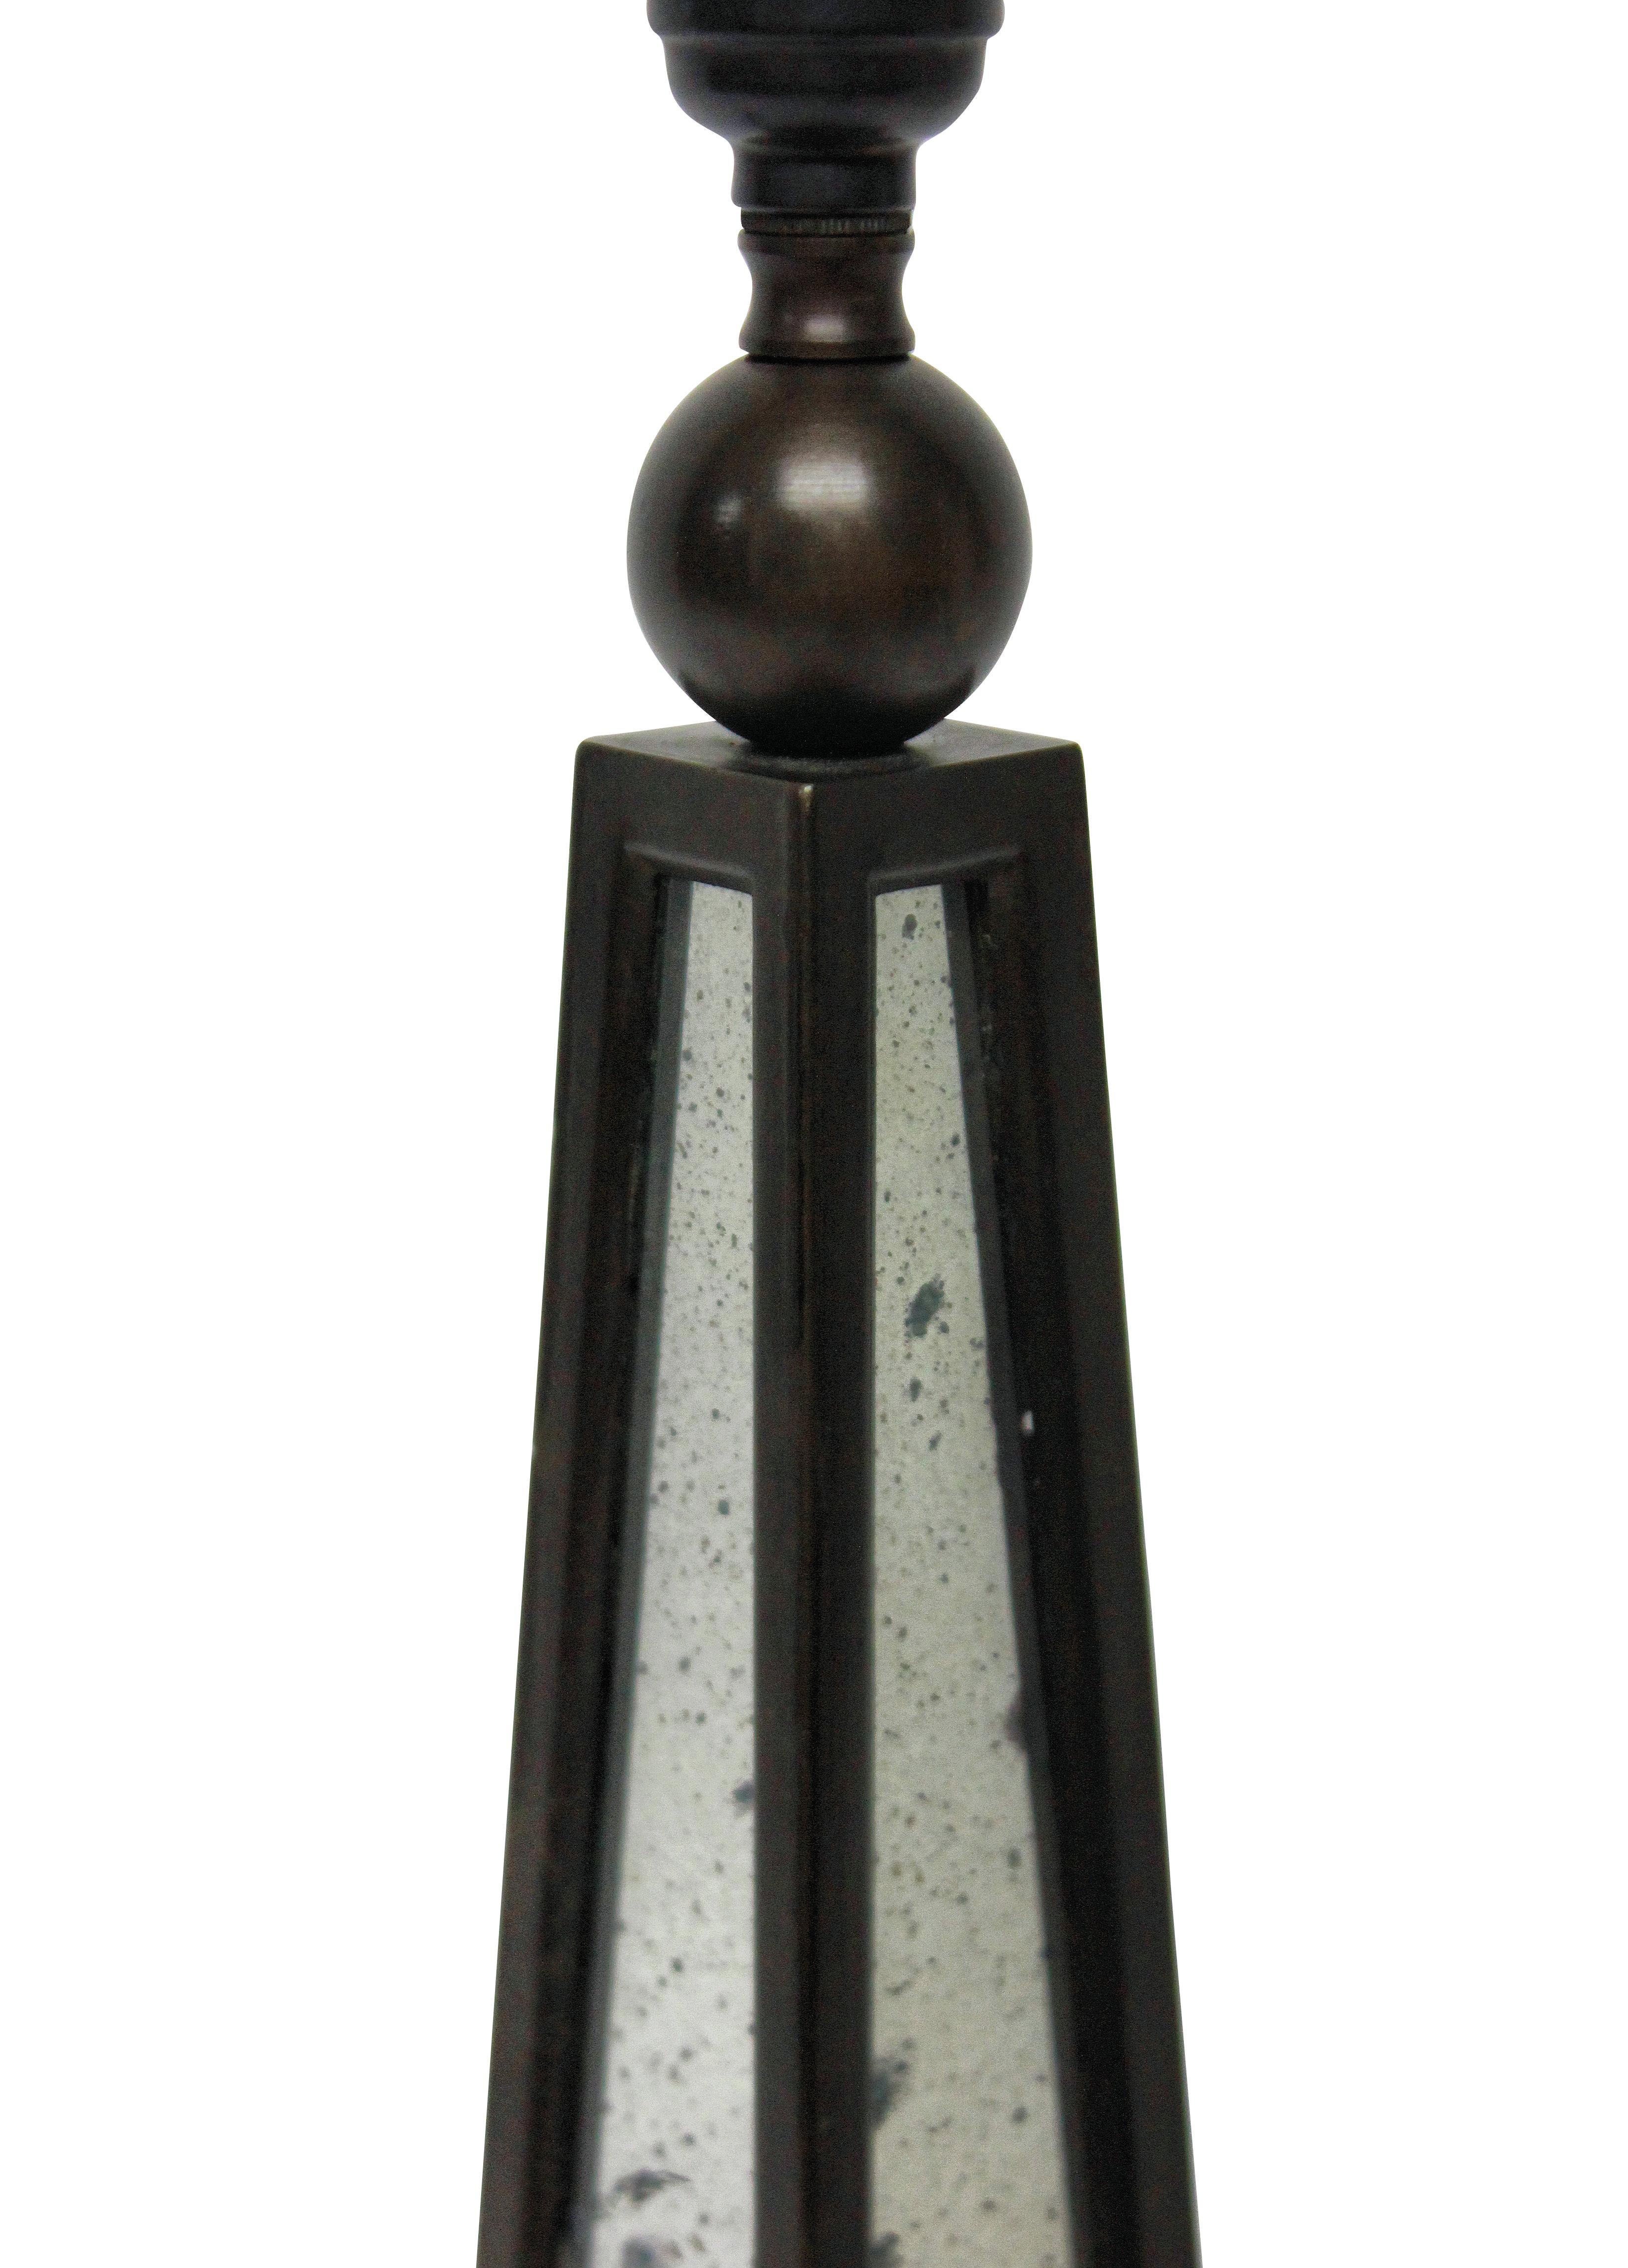 English Pair of Obelisk Lamps with Mirror Panels